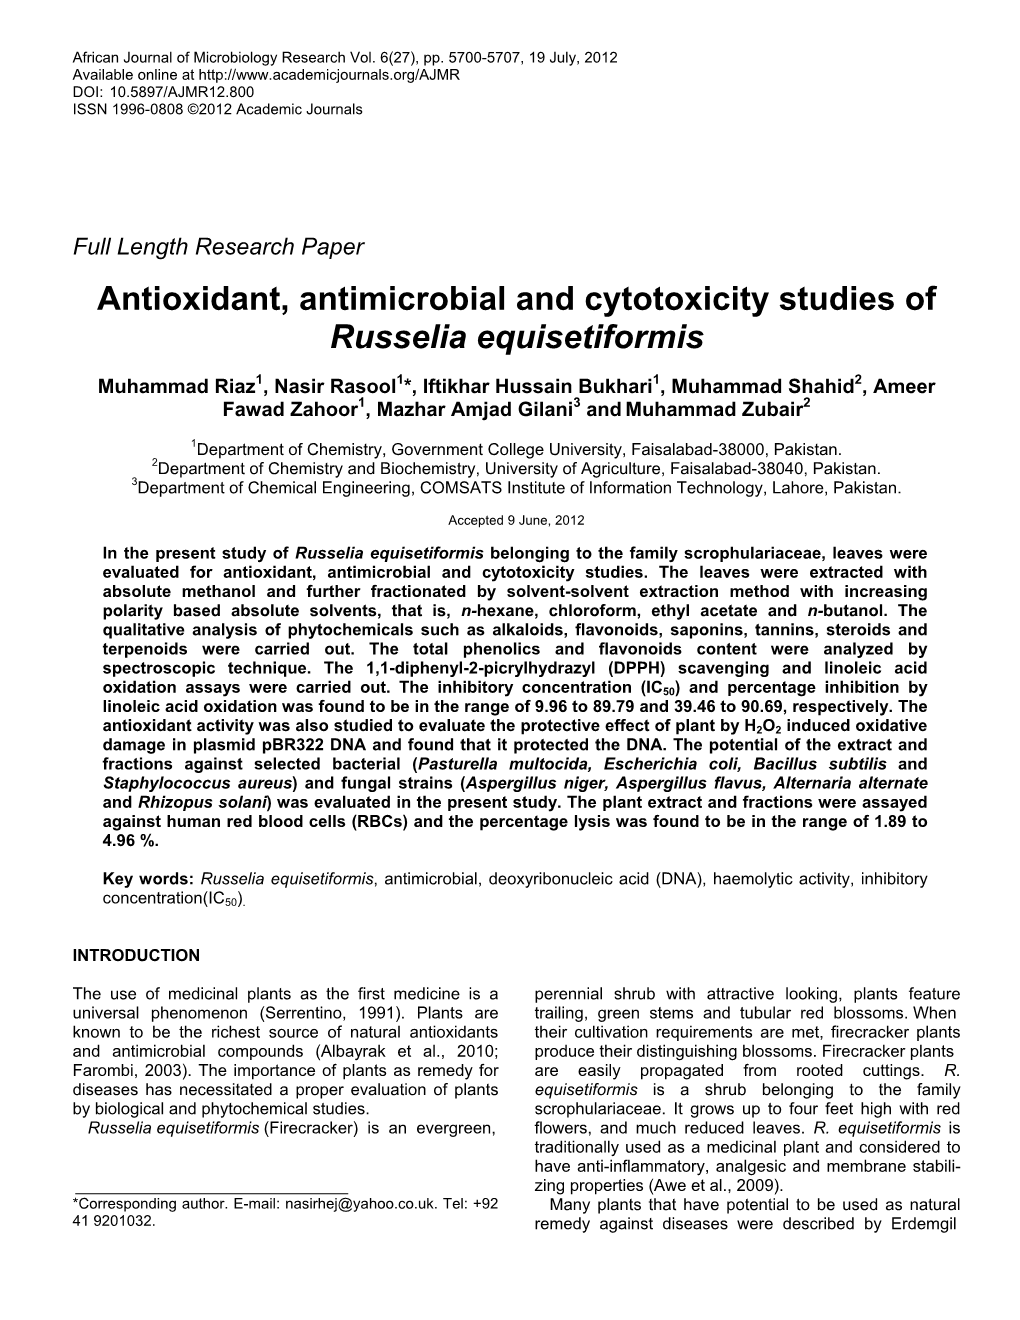 Antioxidant, Antimicrobial and Cytotoxicity Studies of Russelia Equisetiformis